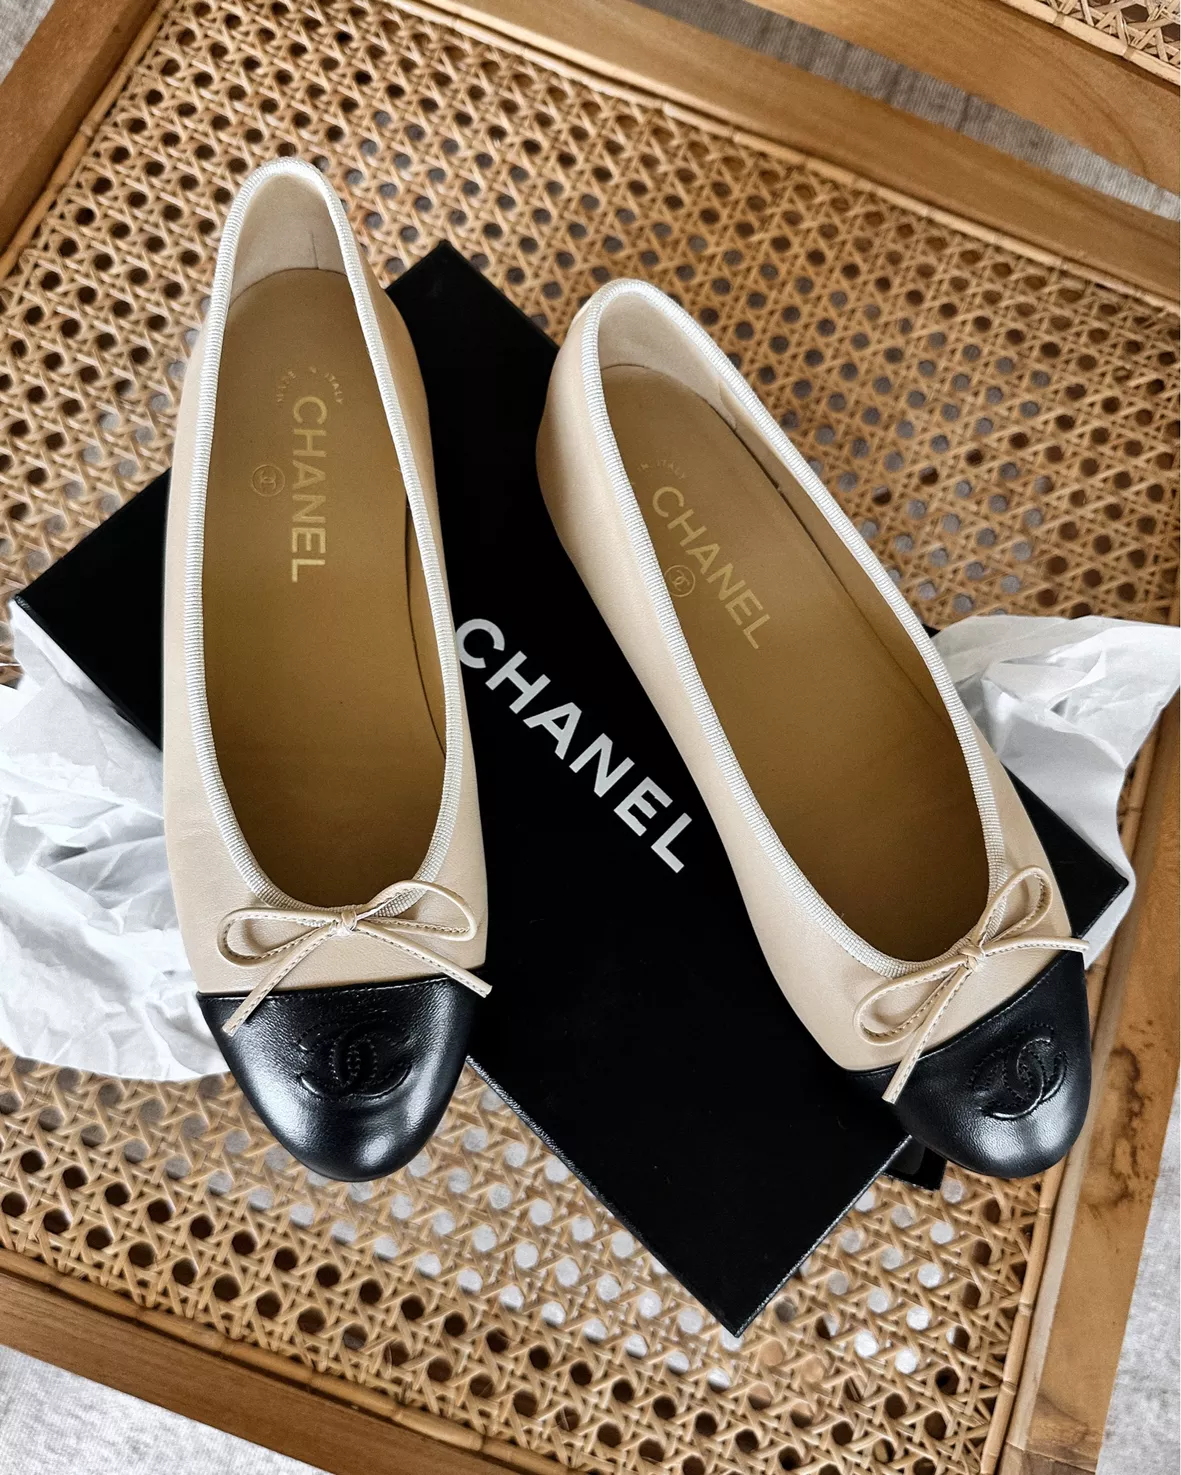 How to Wear Chanel Ballet Flats